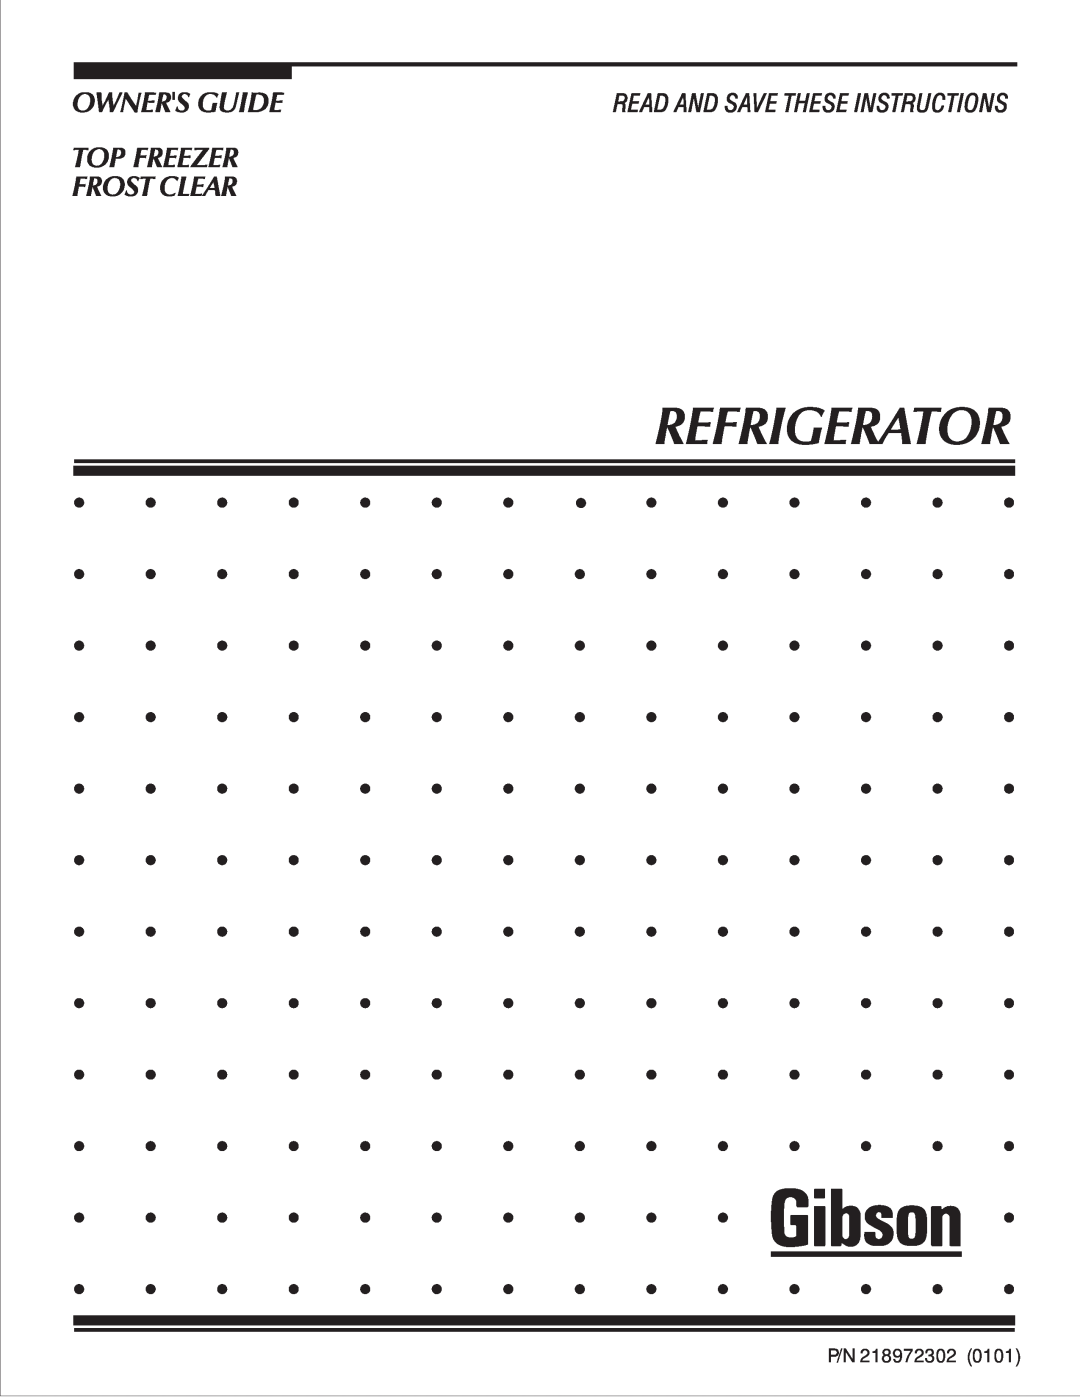 Electrolux - Gibson Top Freezer Frost Clear Refrigerator manual P/N 